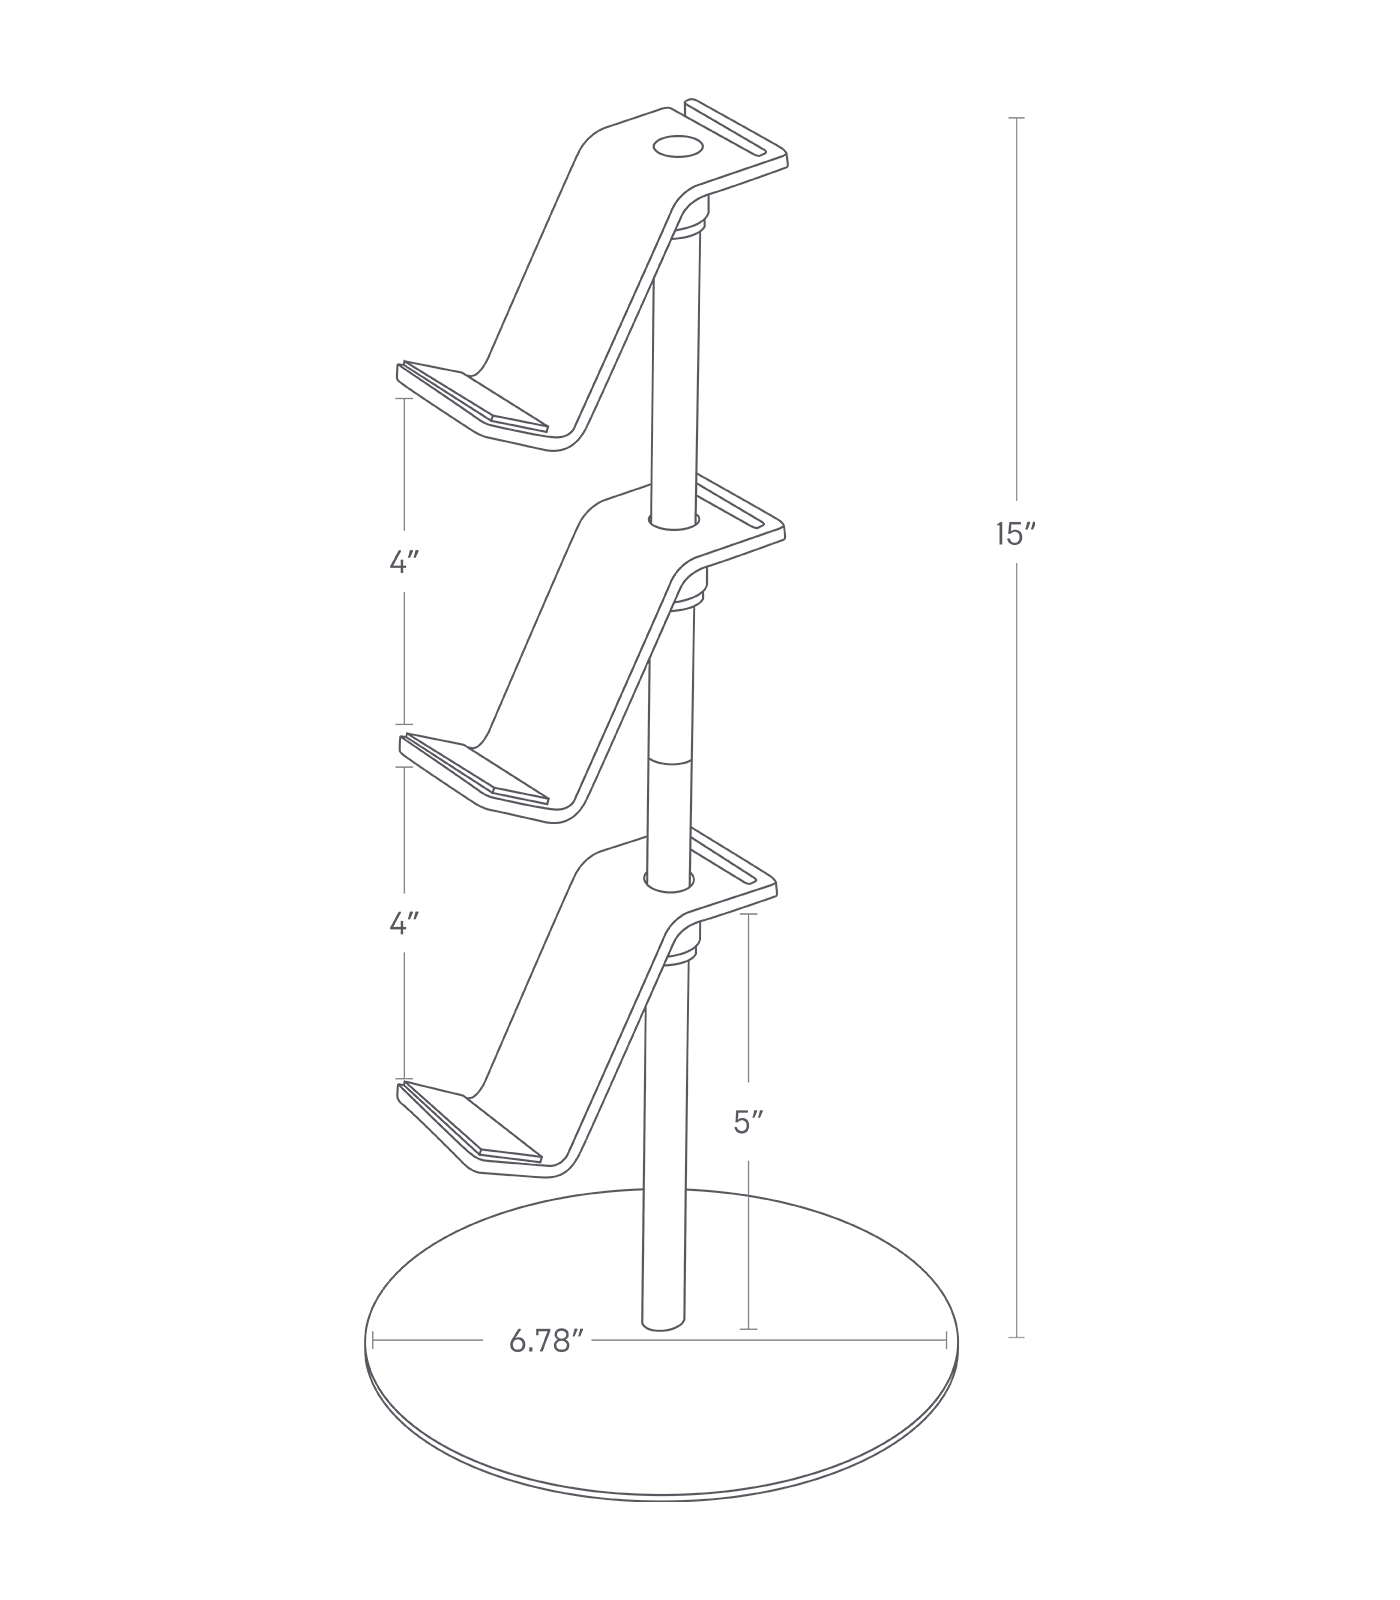 Dimension Image for a Controller Stand on a white background showing a height of 15